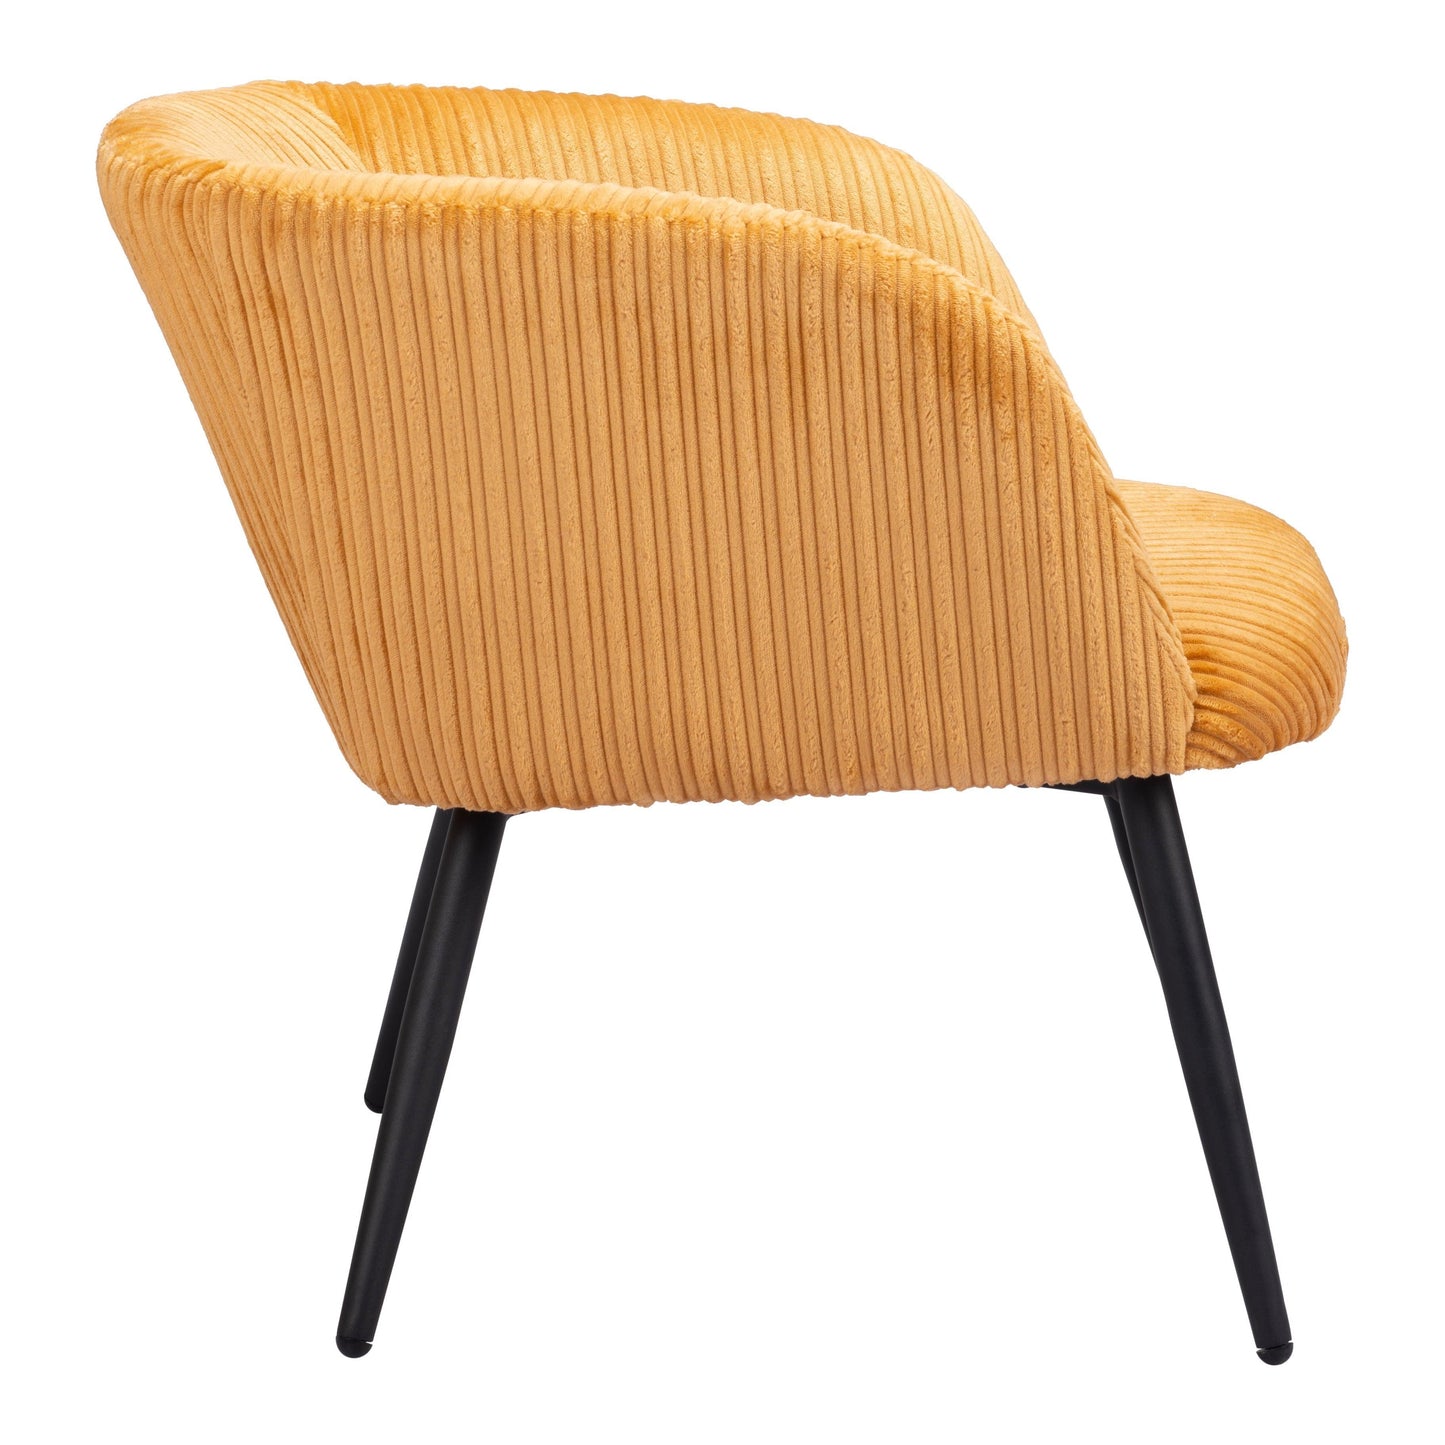 Papillion Accent Chair Yellow - Sideboards and Things Brand_Zuo Modern, Color_Black, Color_Yellow, Finish_Powder Coated, Materials_Metal, Materials_Wood, Metal Type_Steel, Product Type_Occasional Chair, Upholstery Type_Fabric Blend, Upholstery Type_Polyester, Wood Species_Plywood